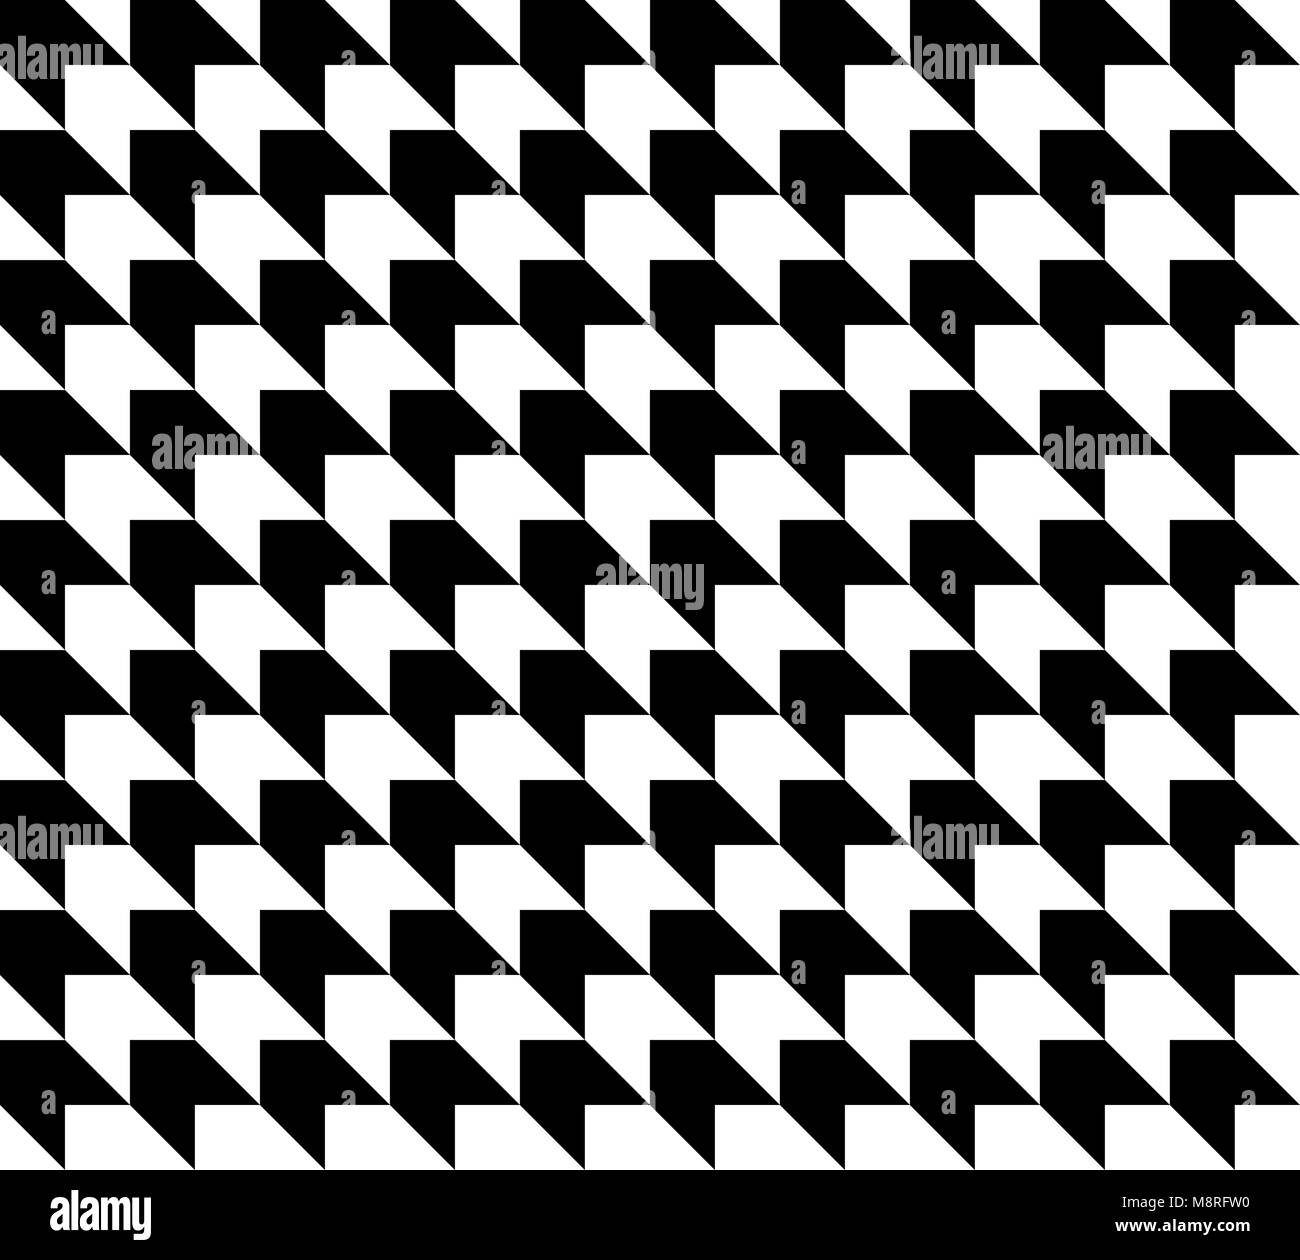 https://c8.alamy.com/comp/M8RFW0/black-and-white-houndstooth-pattern-vector-M8RFW0.jpg